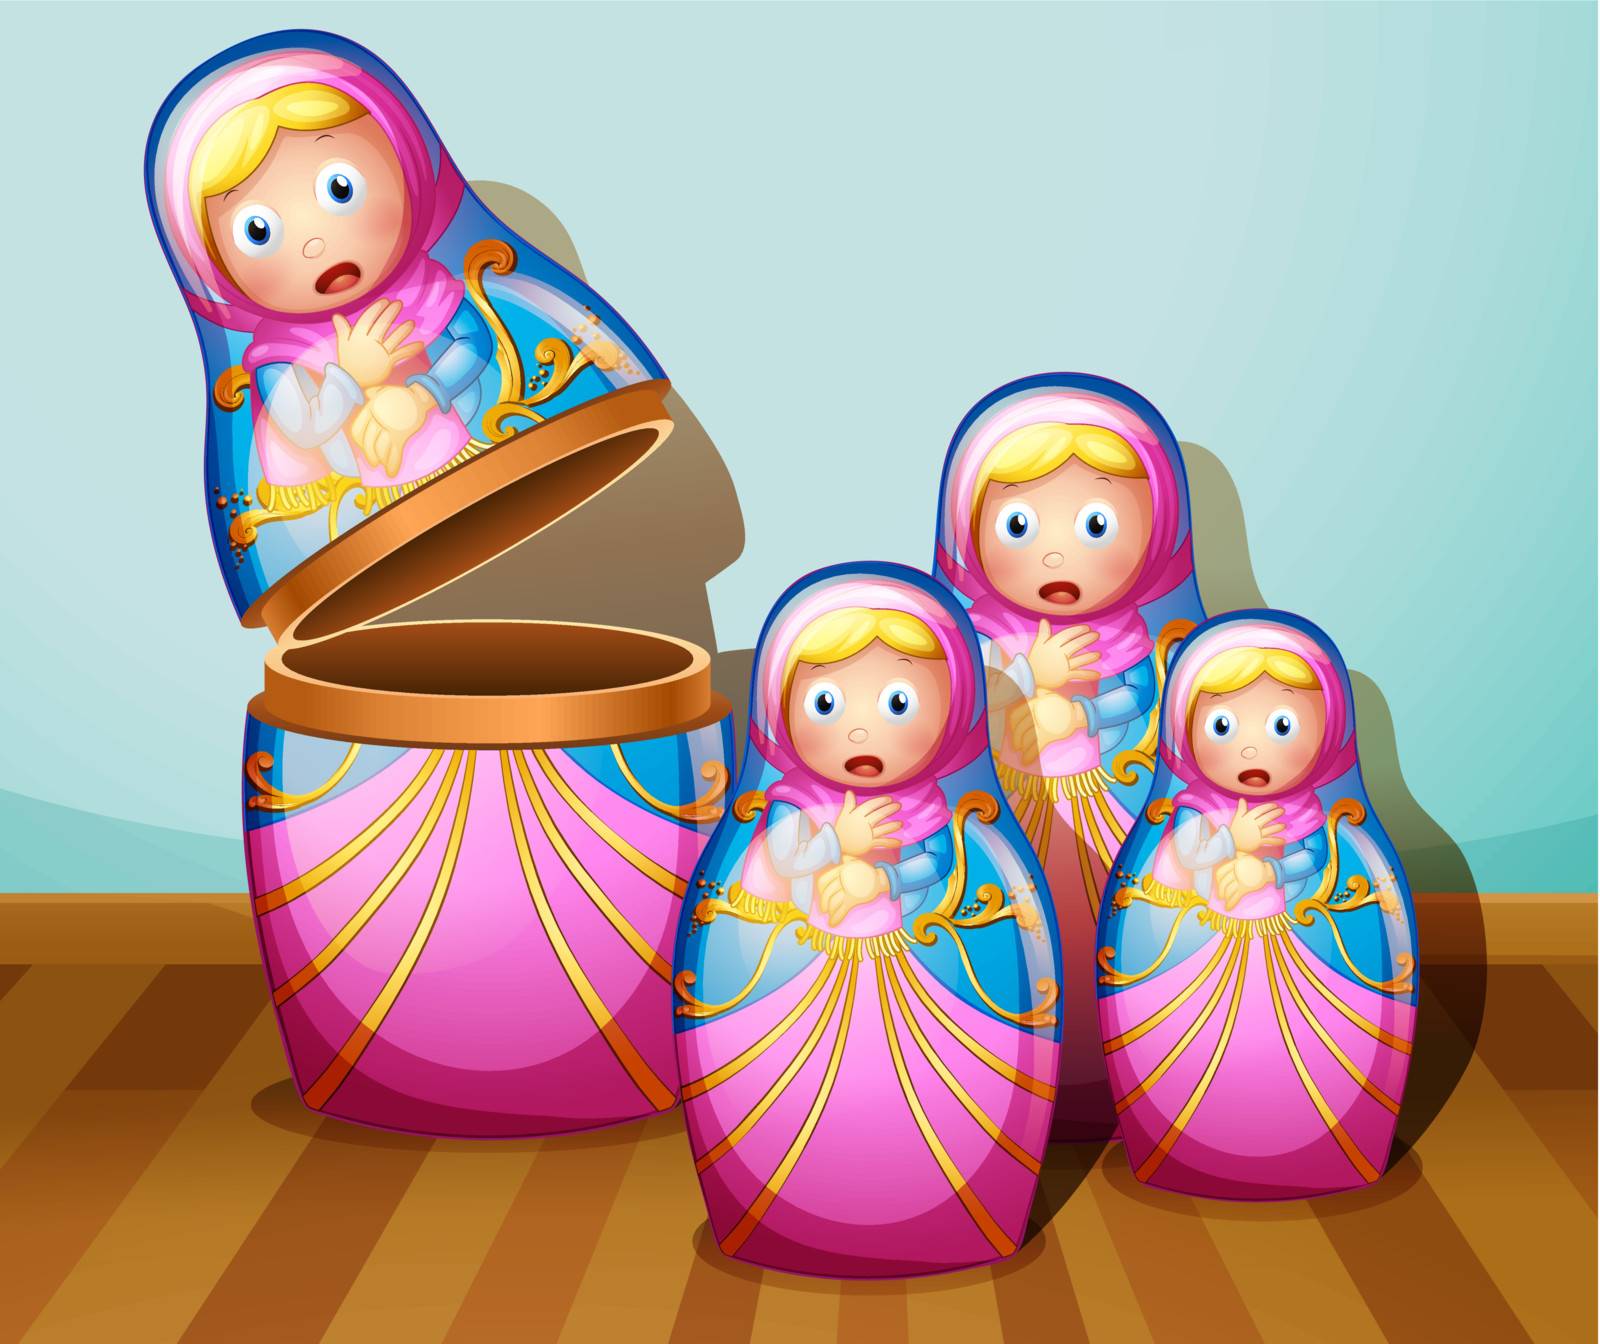 Illustration of the four colorful Russian dolls